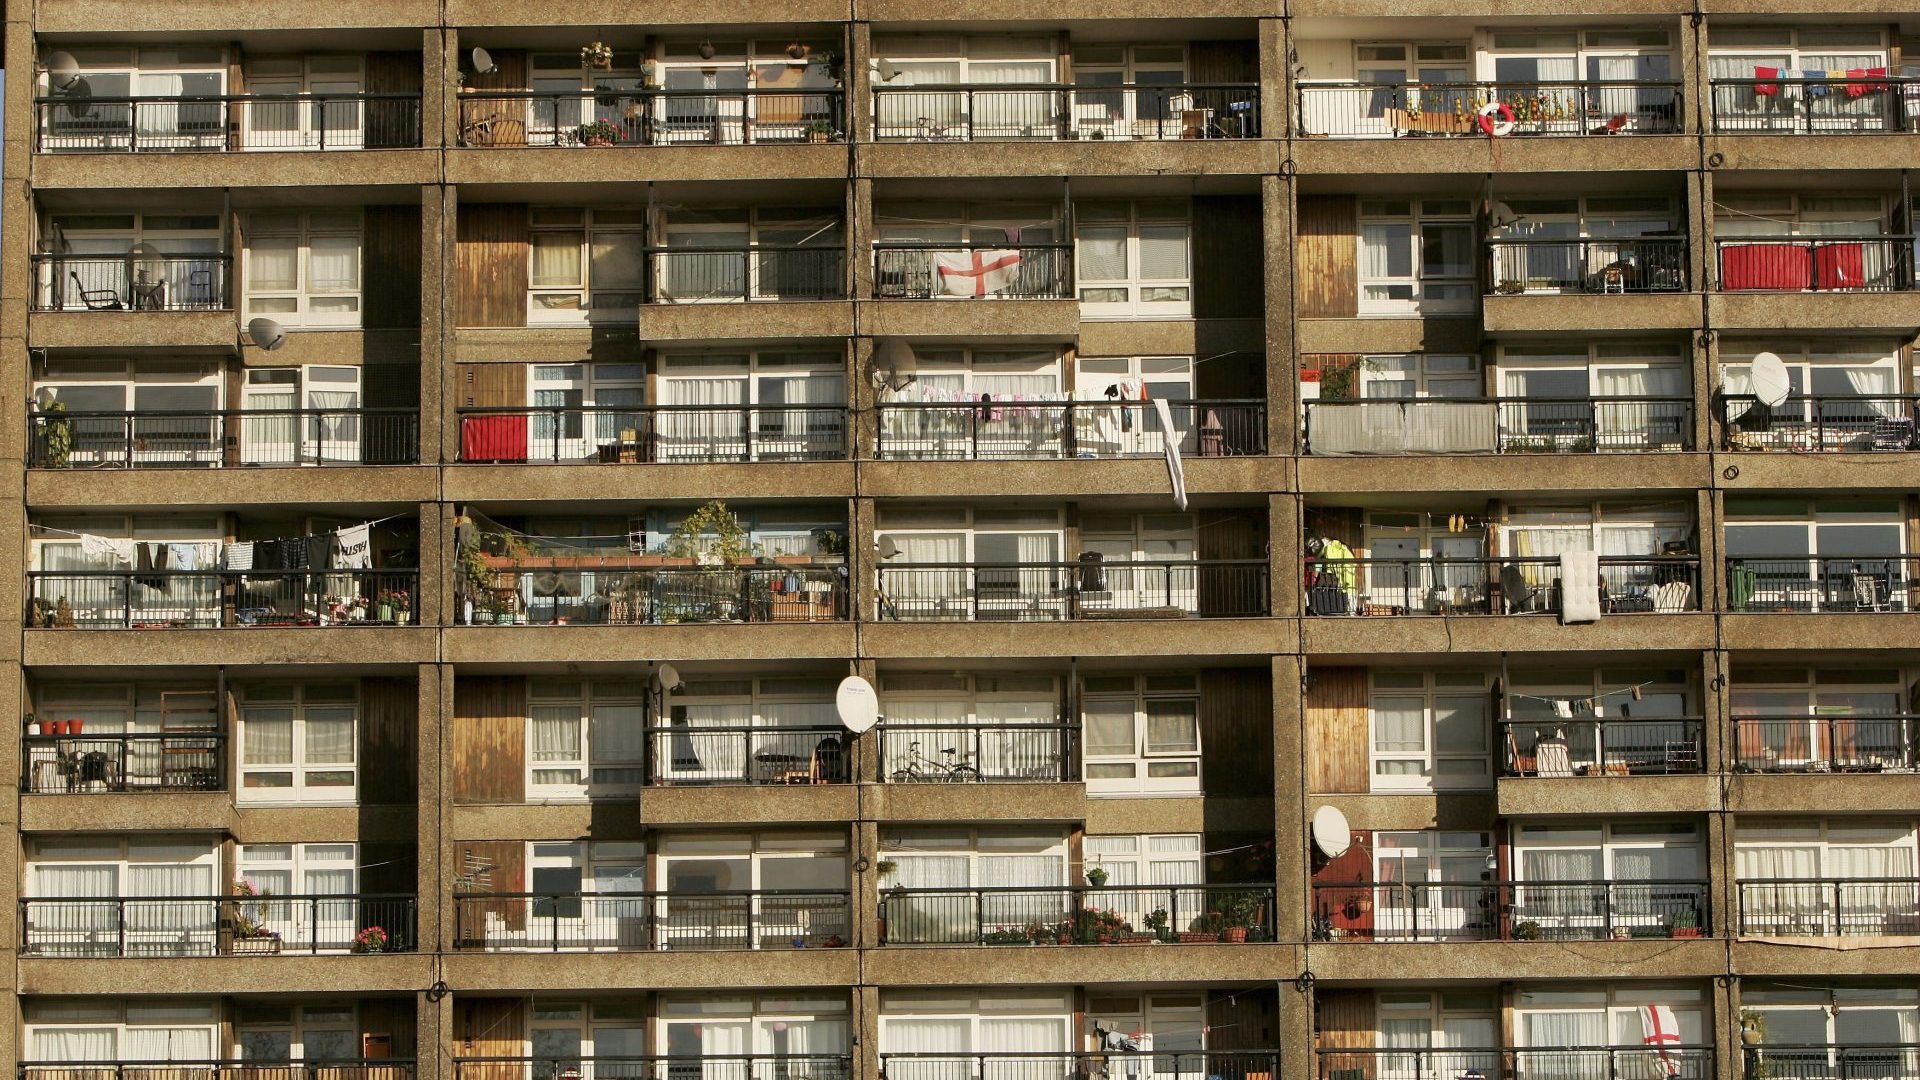 Many flatshares in London house four or five people who would rather have their own home. Photo: Scott Barbour/Getty